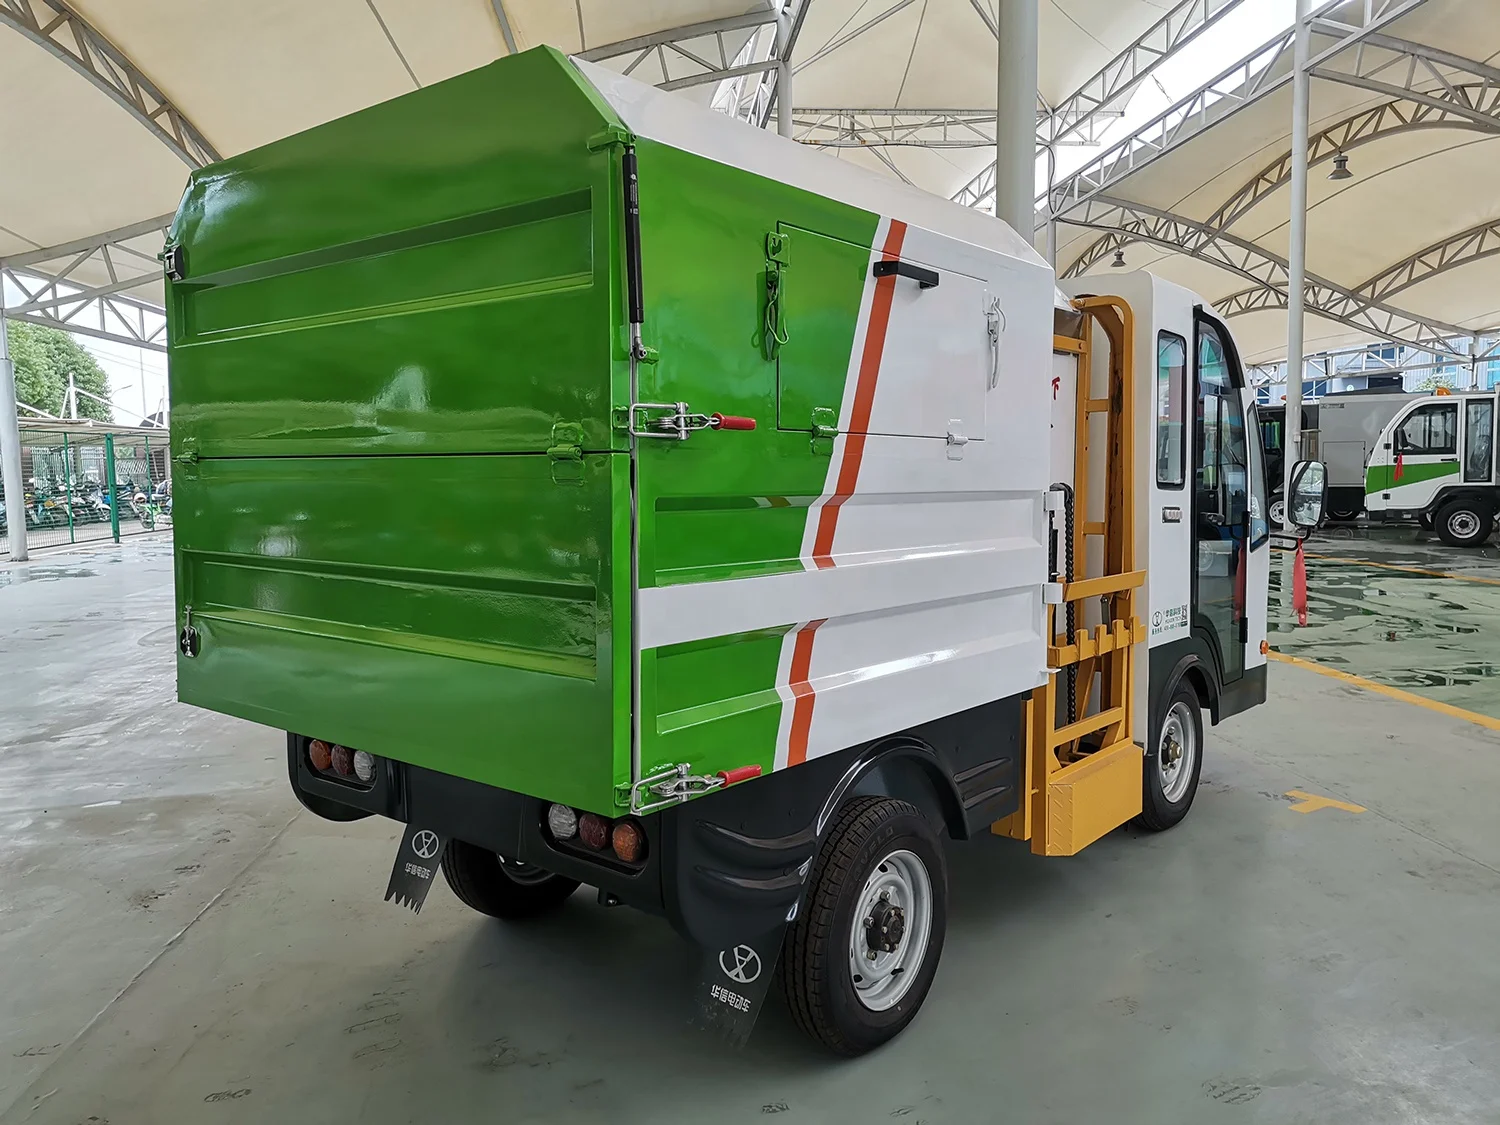 Urban Electric Sealed Bin Lifter Garbage Collection Transfer Compactor Vehicle Truck Price